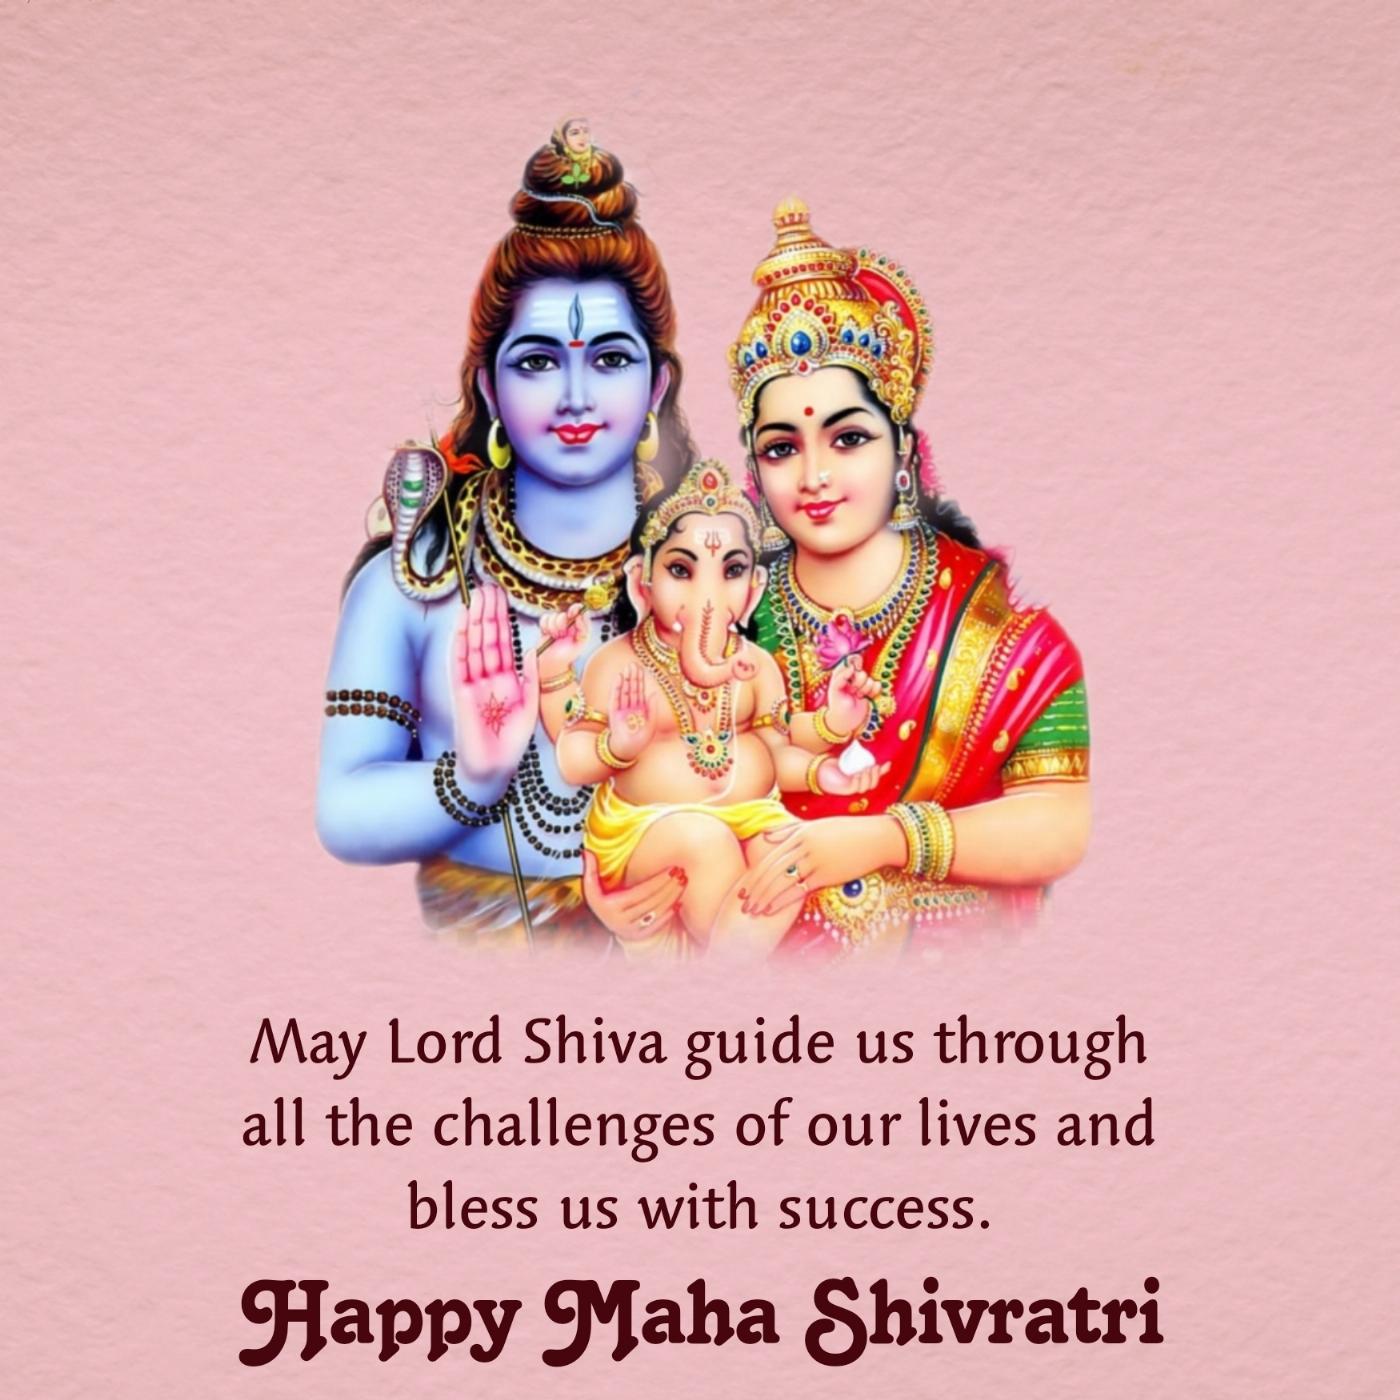 May Lord Shiva guide us through all the challenges of our lives